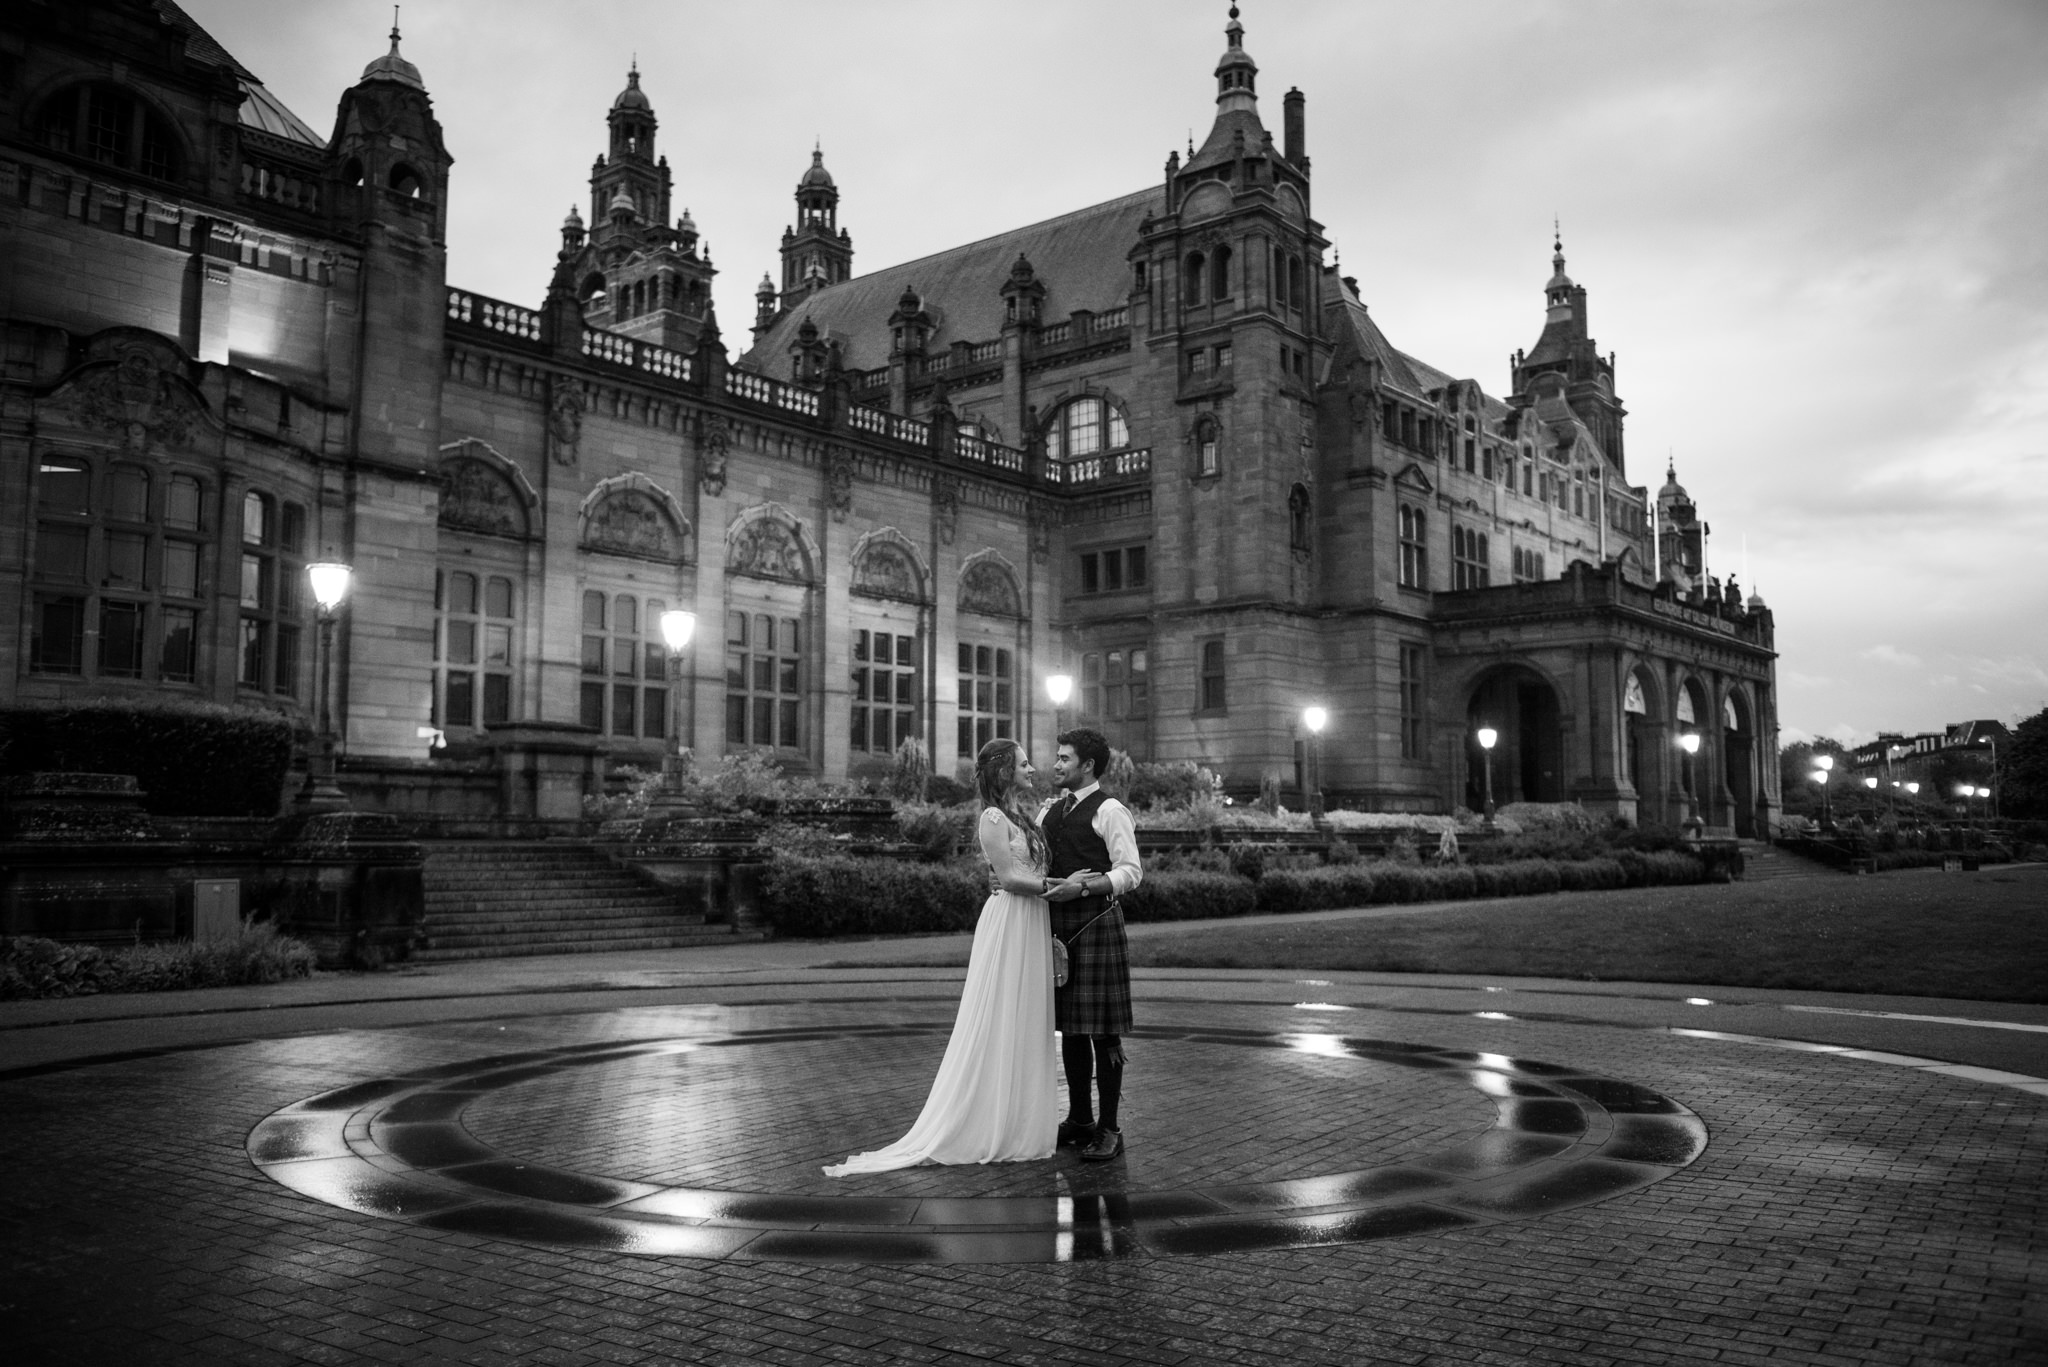  Carrie and Jonathan's wedding - Glasgow University Chapel and Kelvingrove Art Gallery - 29 July 2017 - © Julie Broadfoot - www.photographybyjuliebee.co.uk 